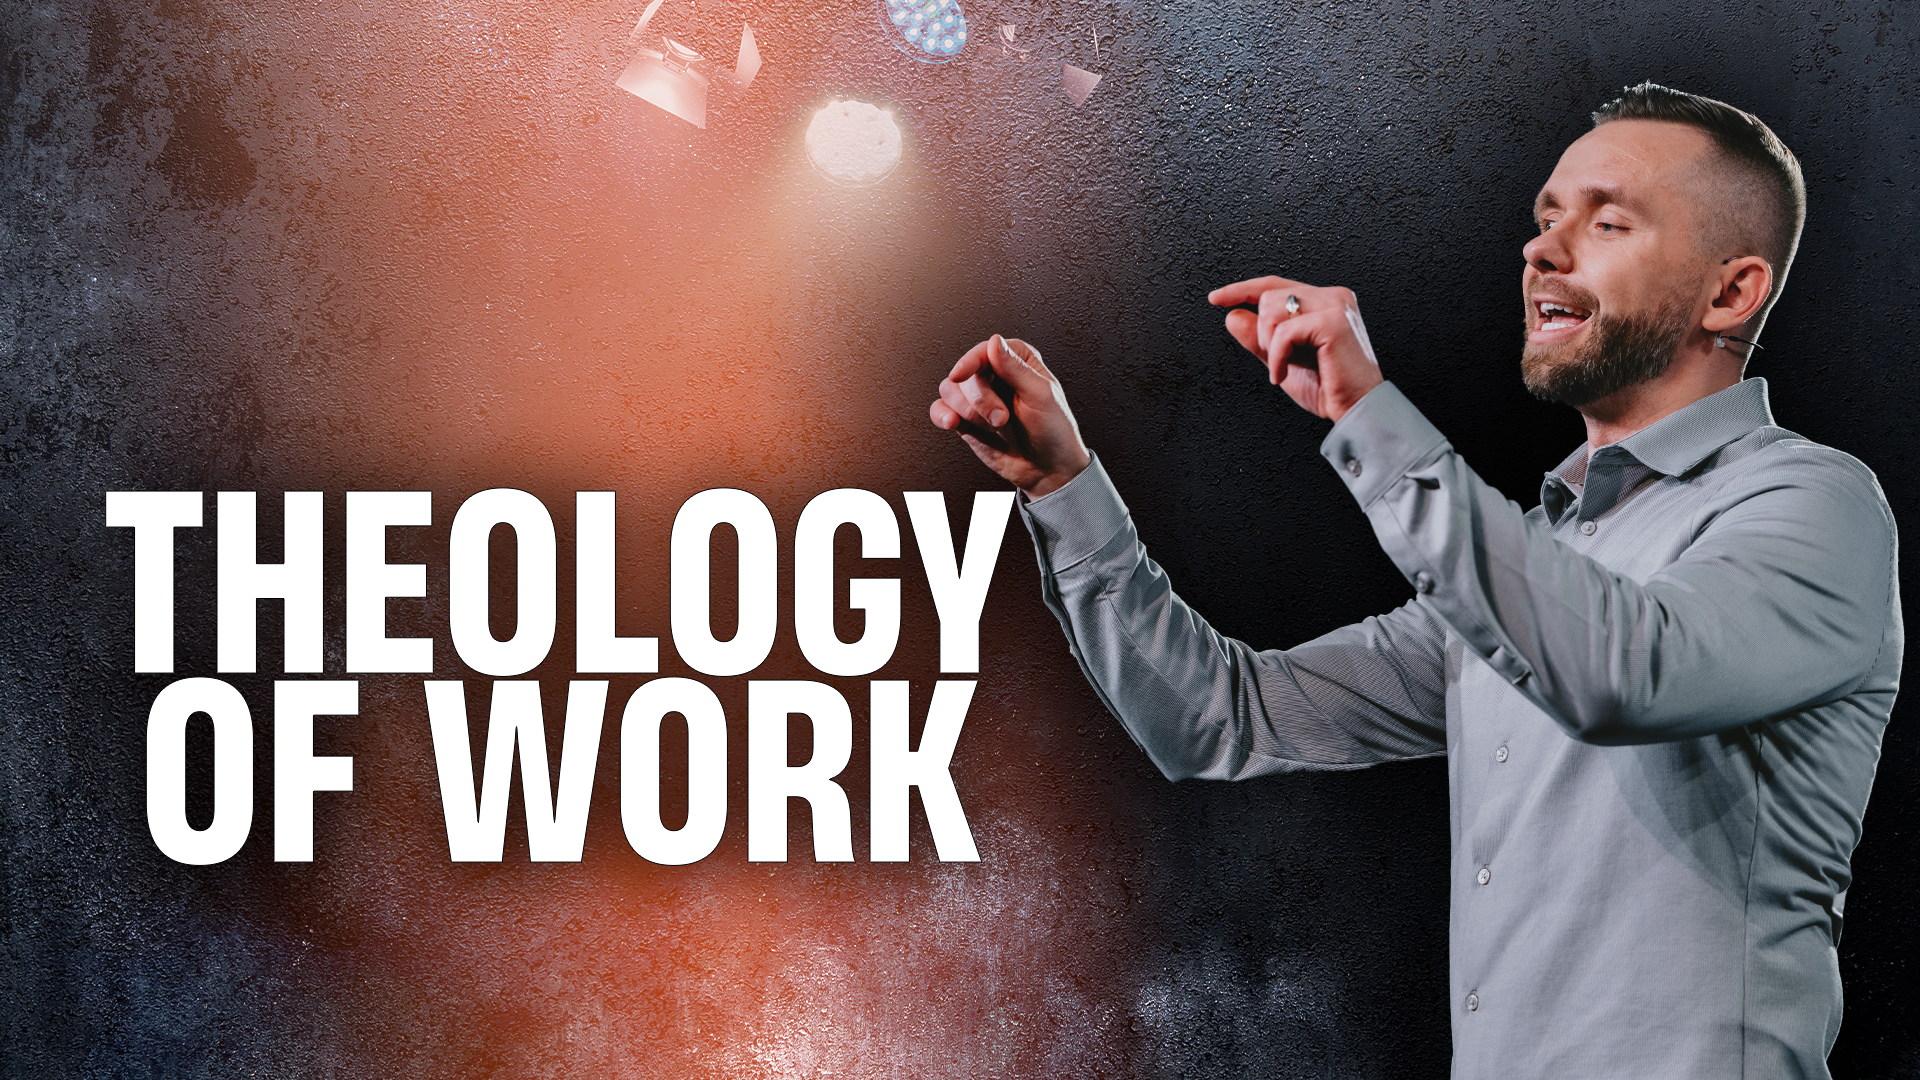 Featured image for 'The Theology of Work '